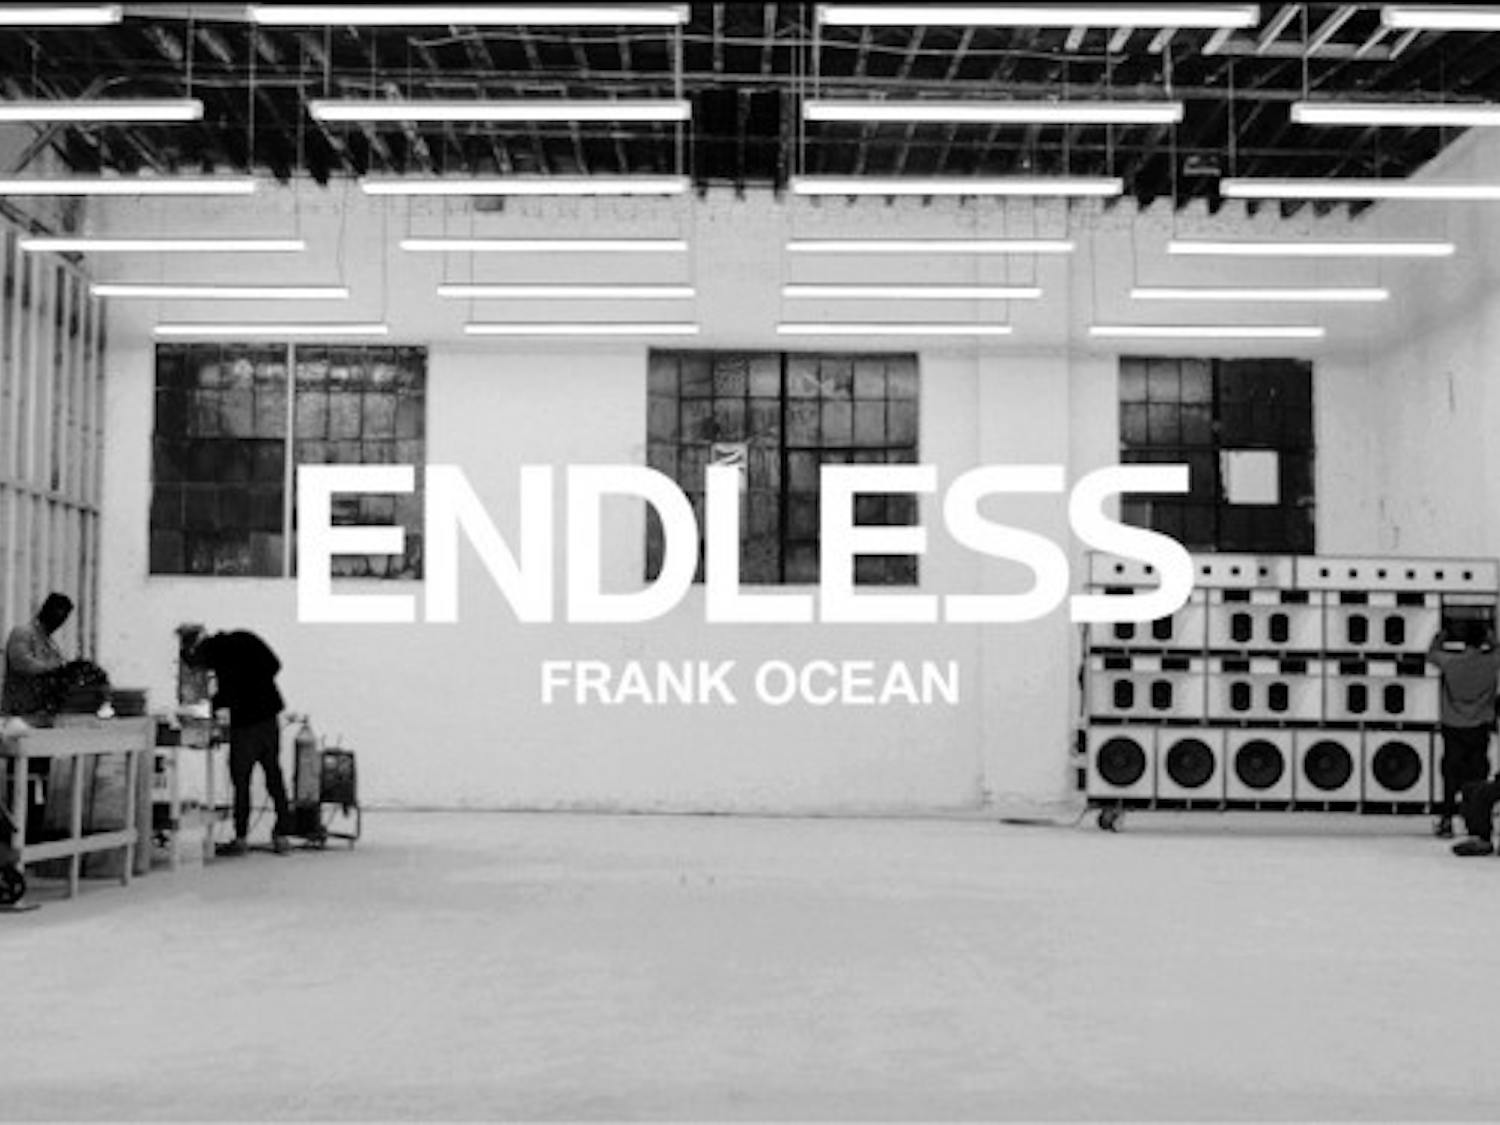 One day before "Blonde" released, Frank Ocean released a visual album called "Endless," available exclusively through Apple Music.